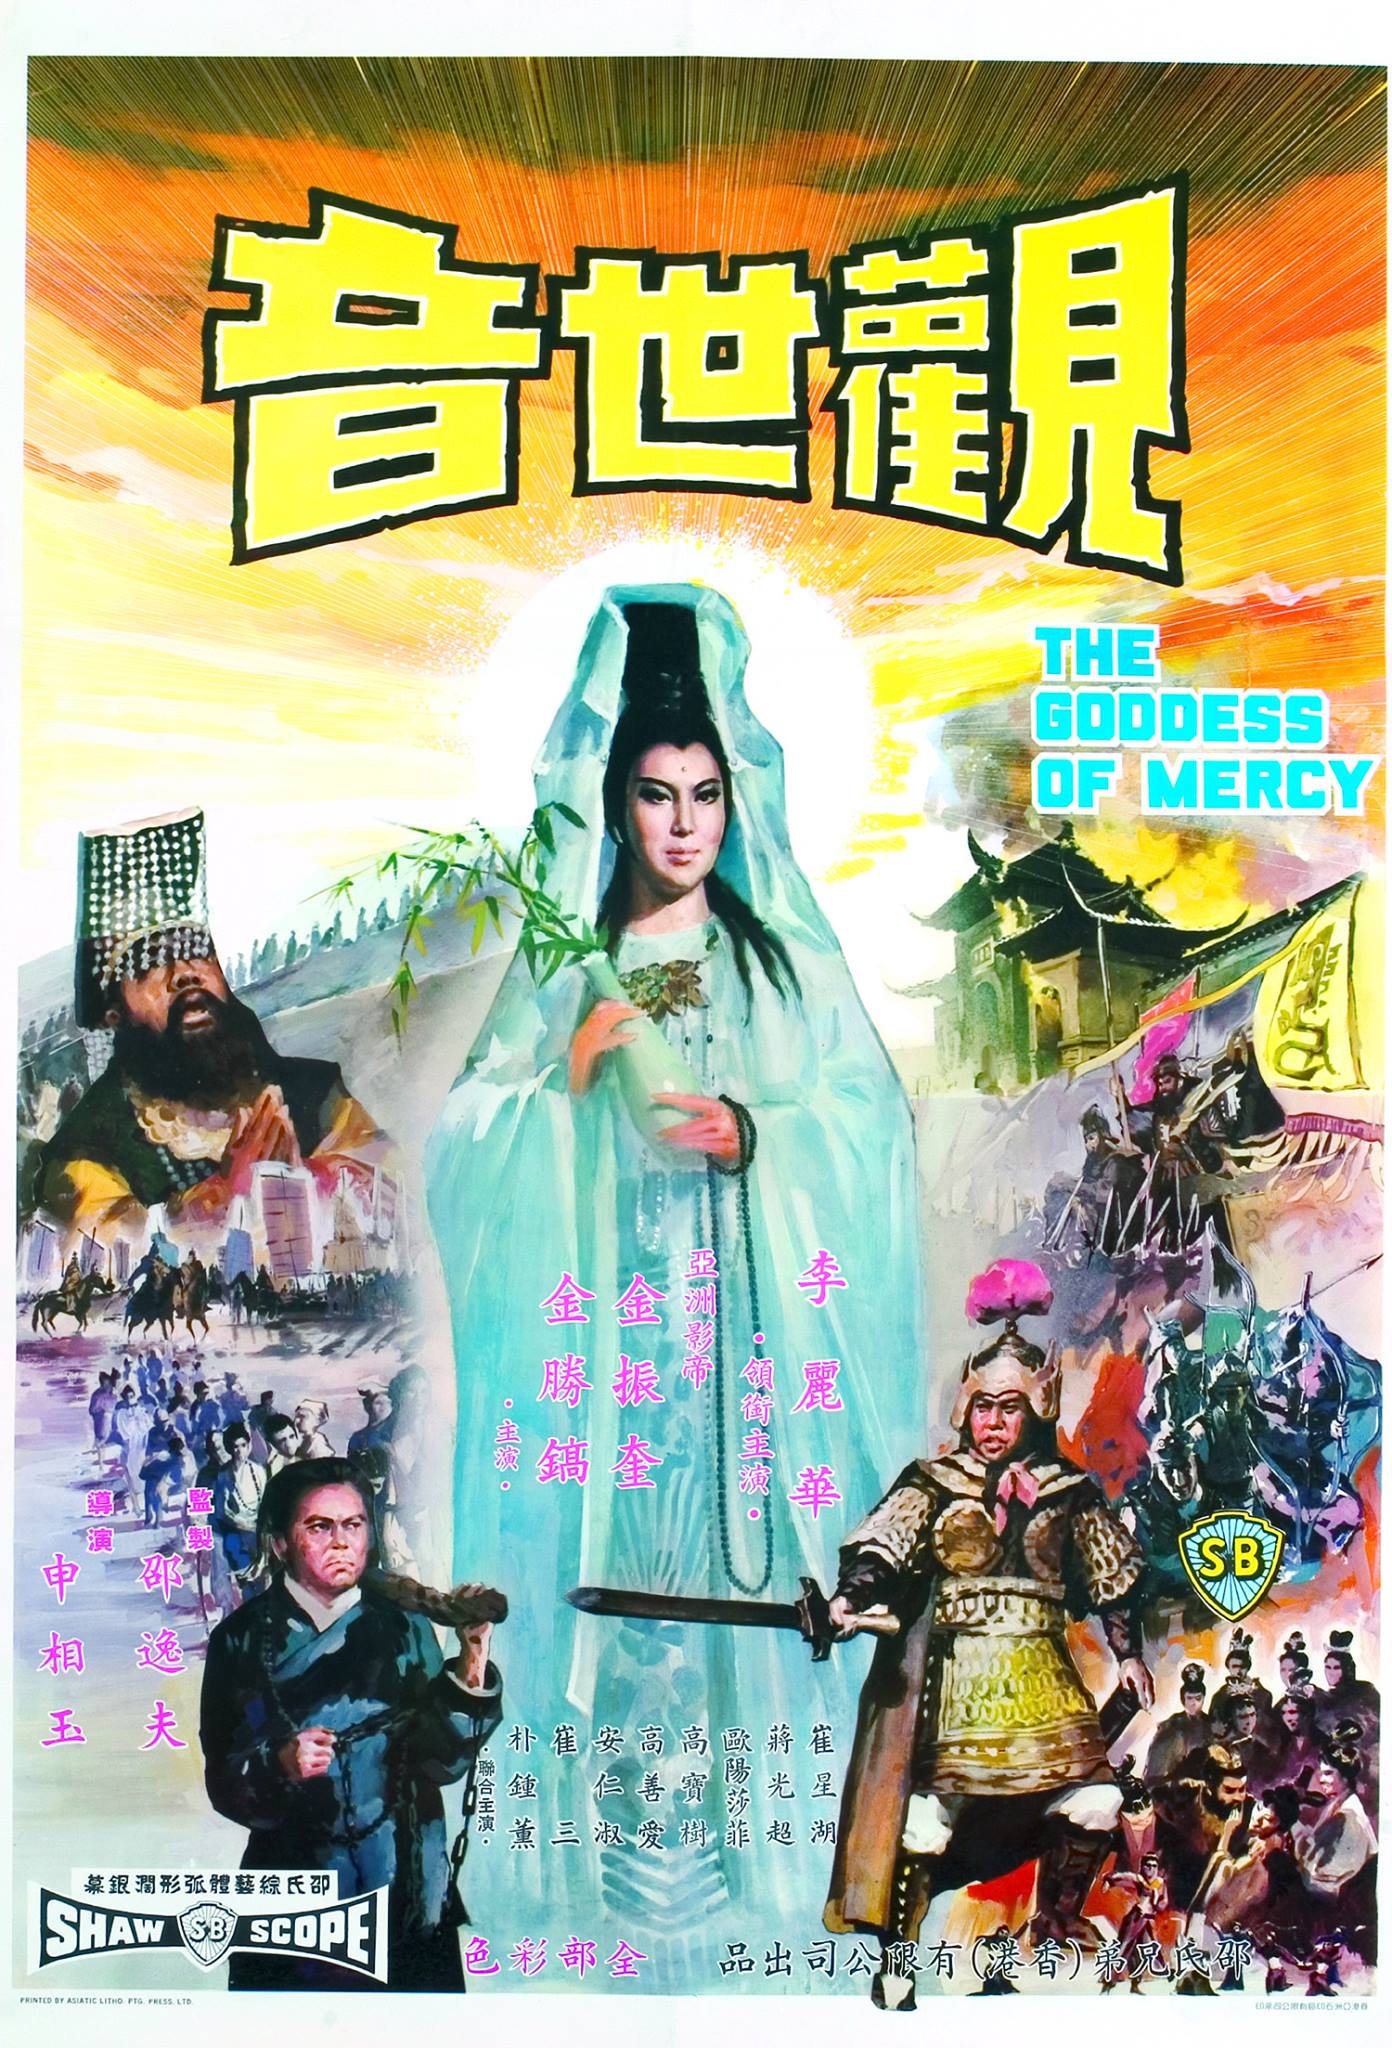 The Goddess of Mercy (1967) with English Subtitles on DVD on DVD